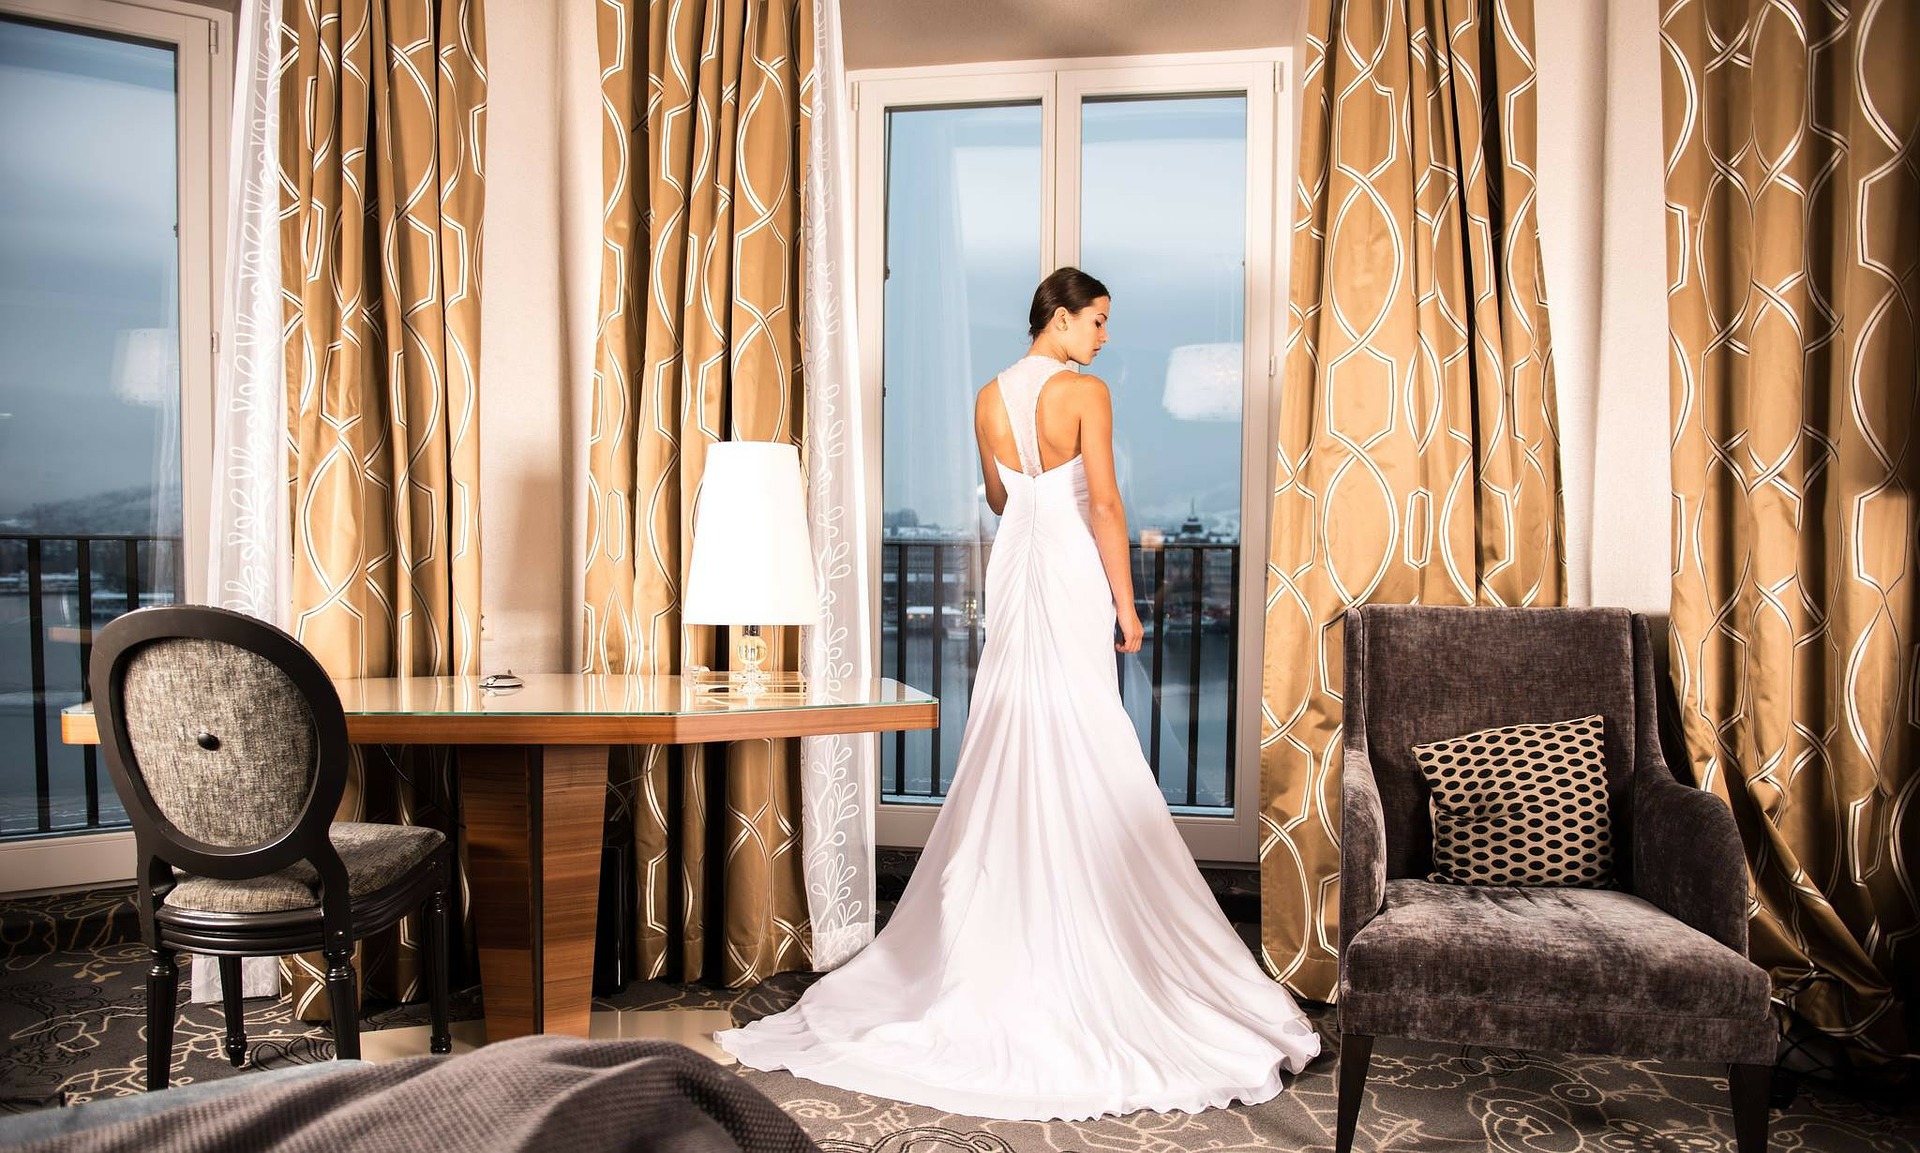 Bride standing in a hotel room with beautiful interior design